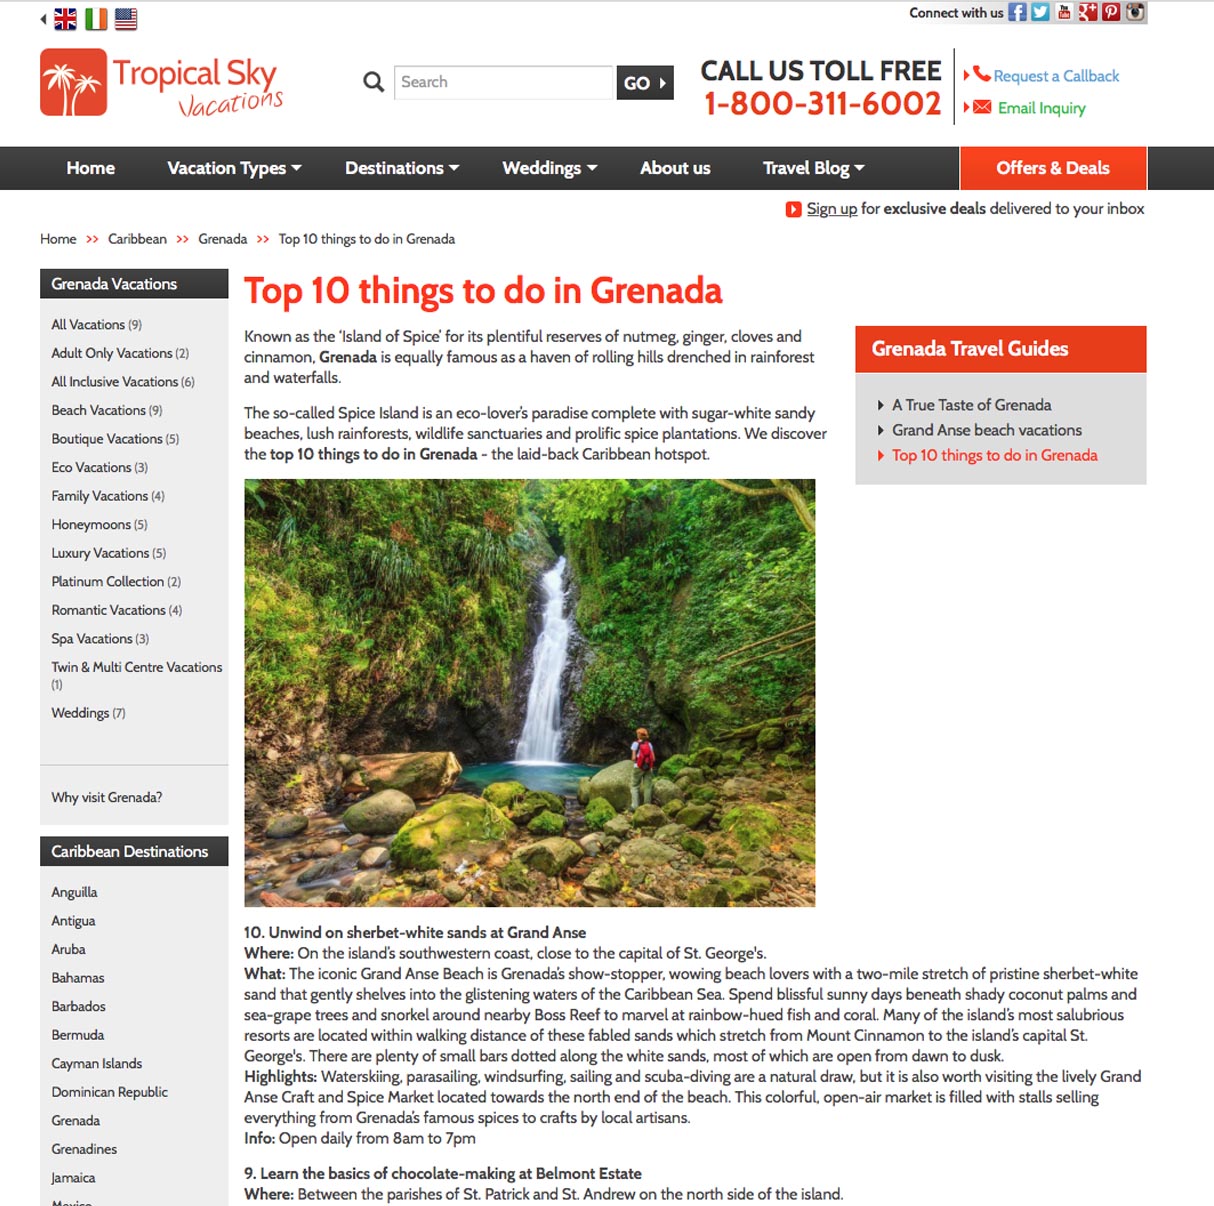 Top 10 things to do in Grenada